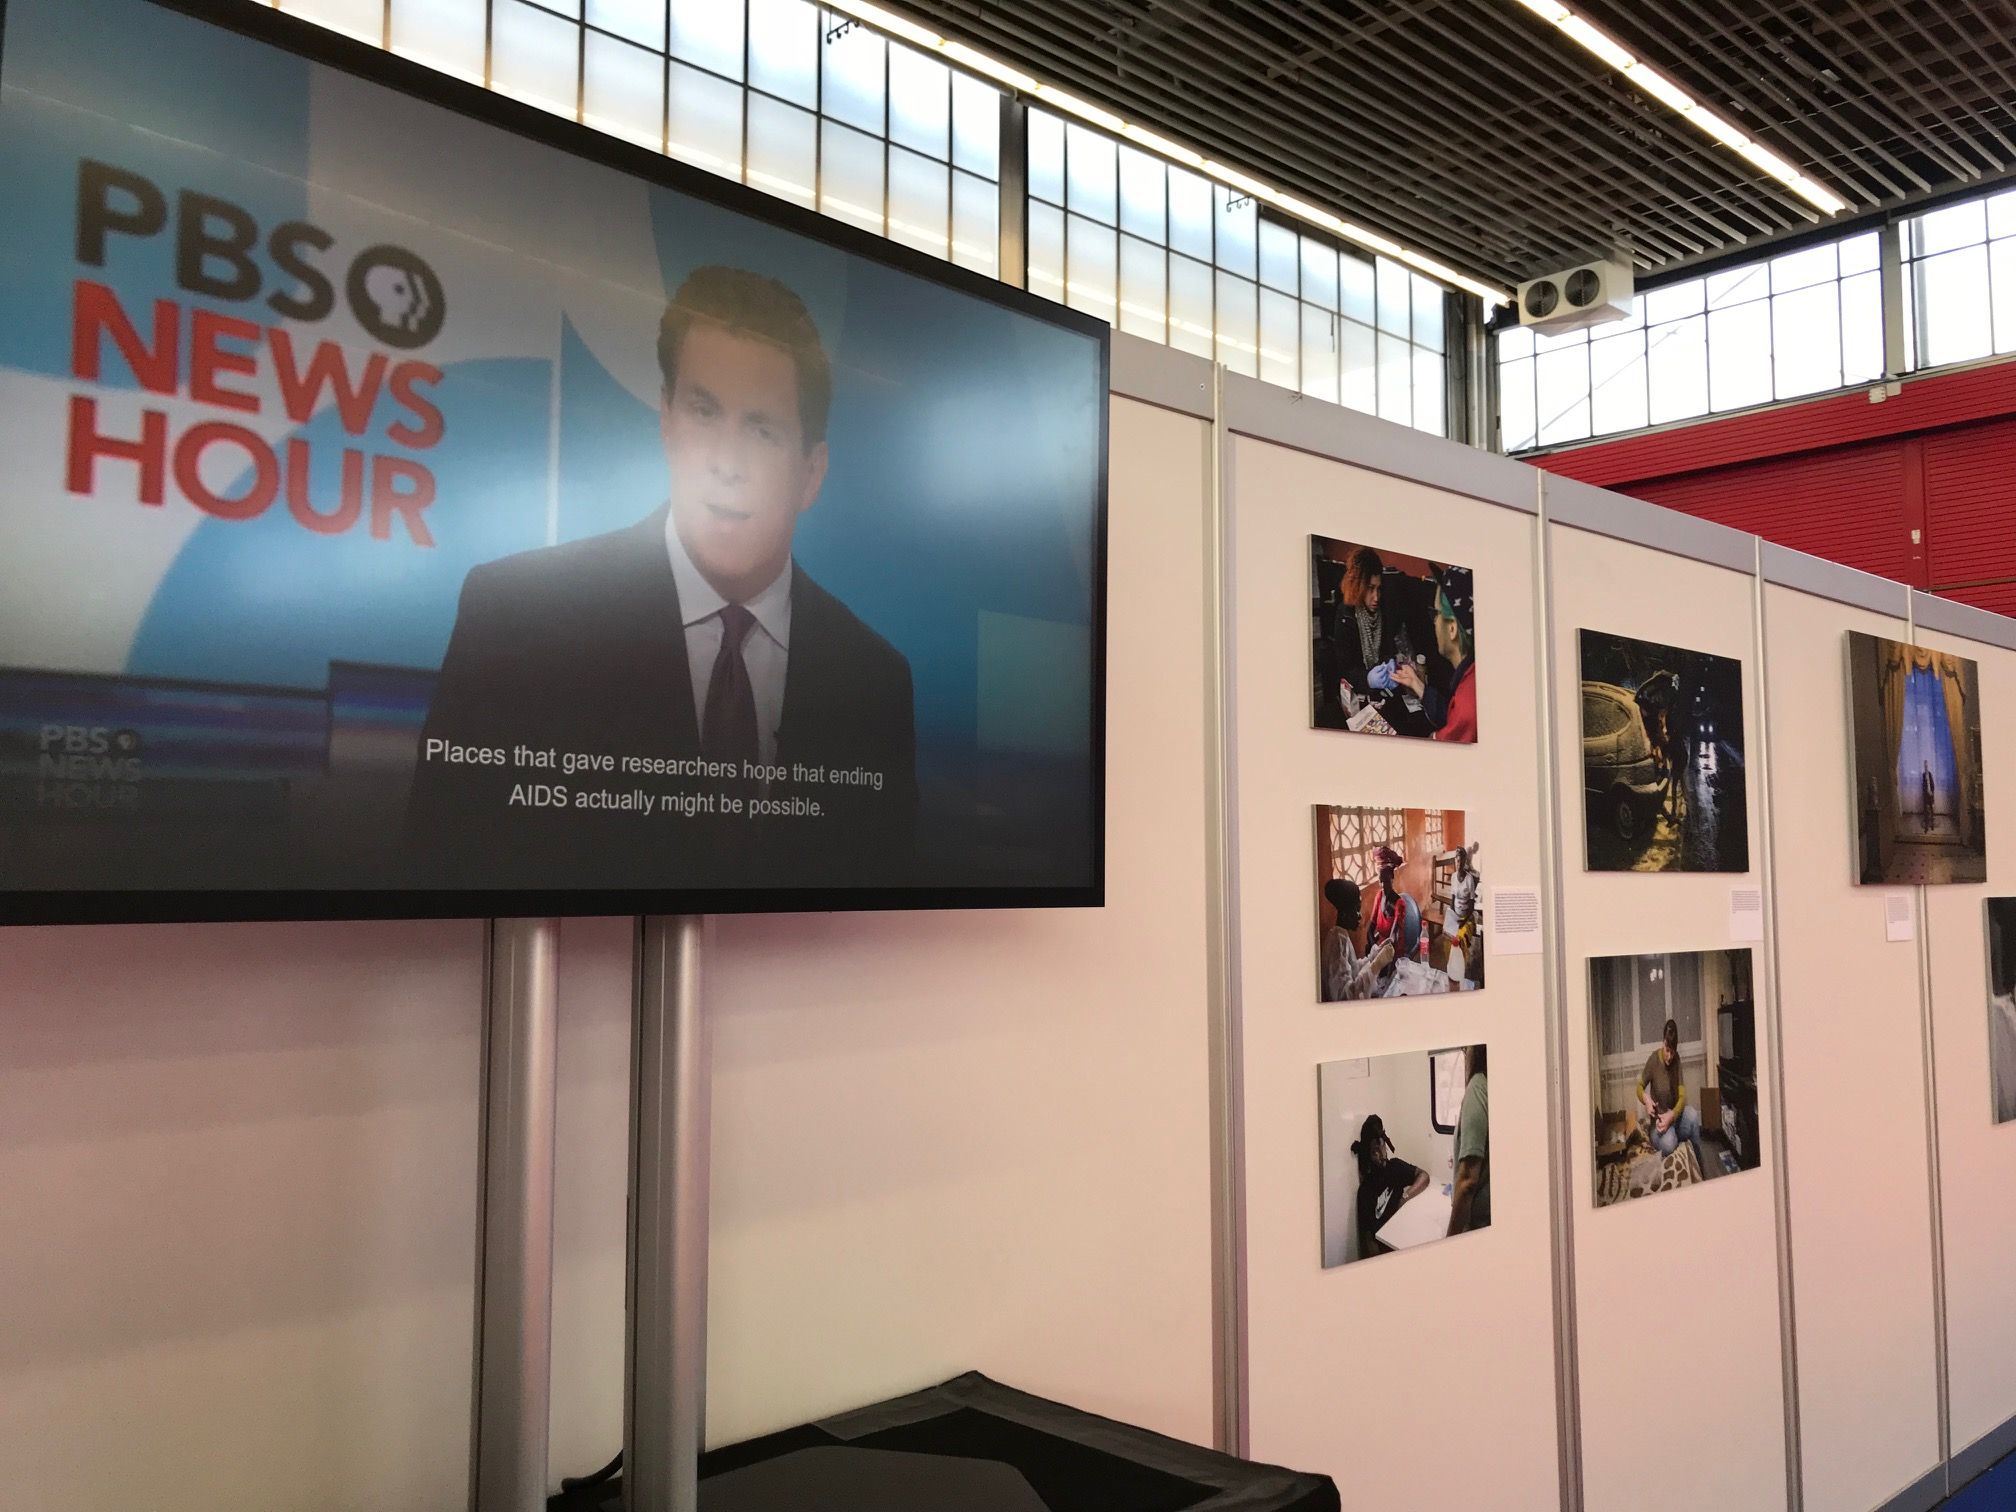 A segment of the Science Magazine and PBS NewsHour "Far From Over" exhibit at the 2018 International AIDS Conference in Amsterdam. Image courtesy of Jon Cohen. The Netherlands, 2018.